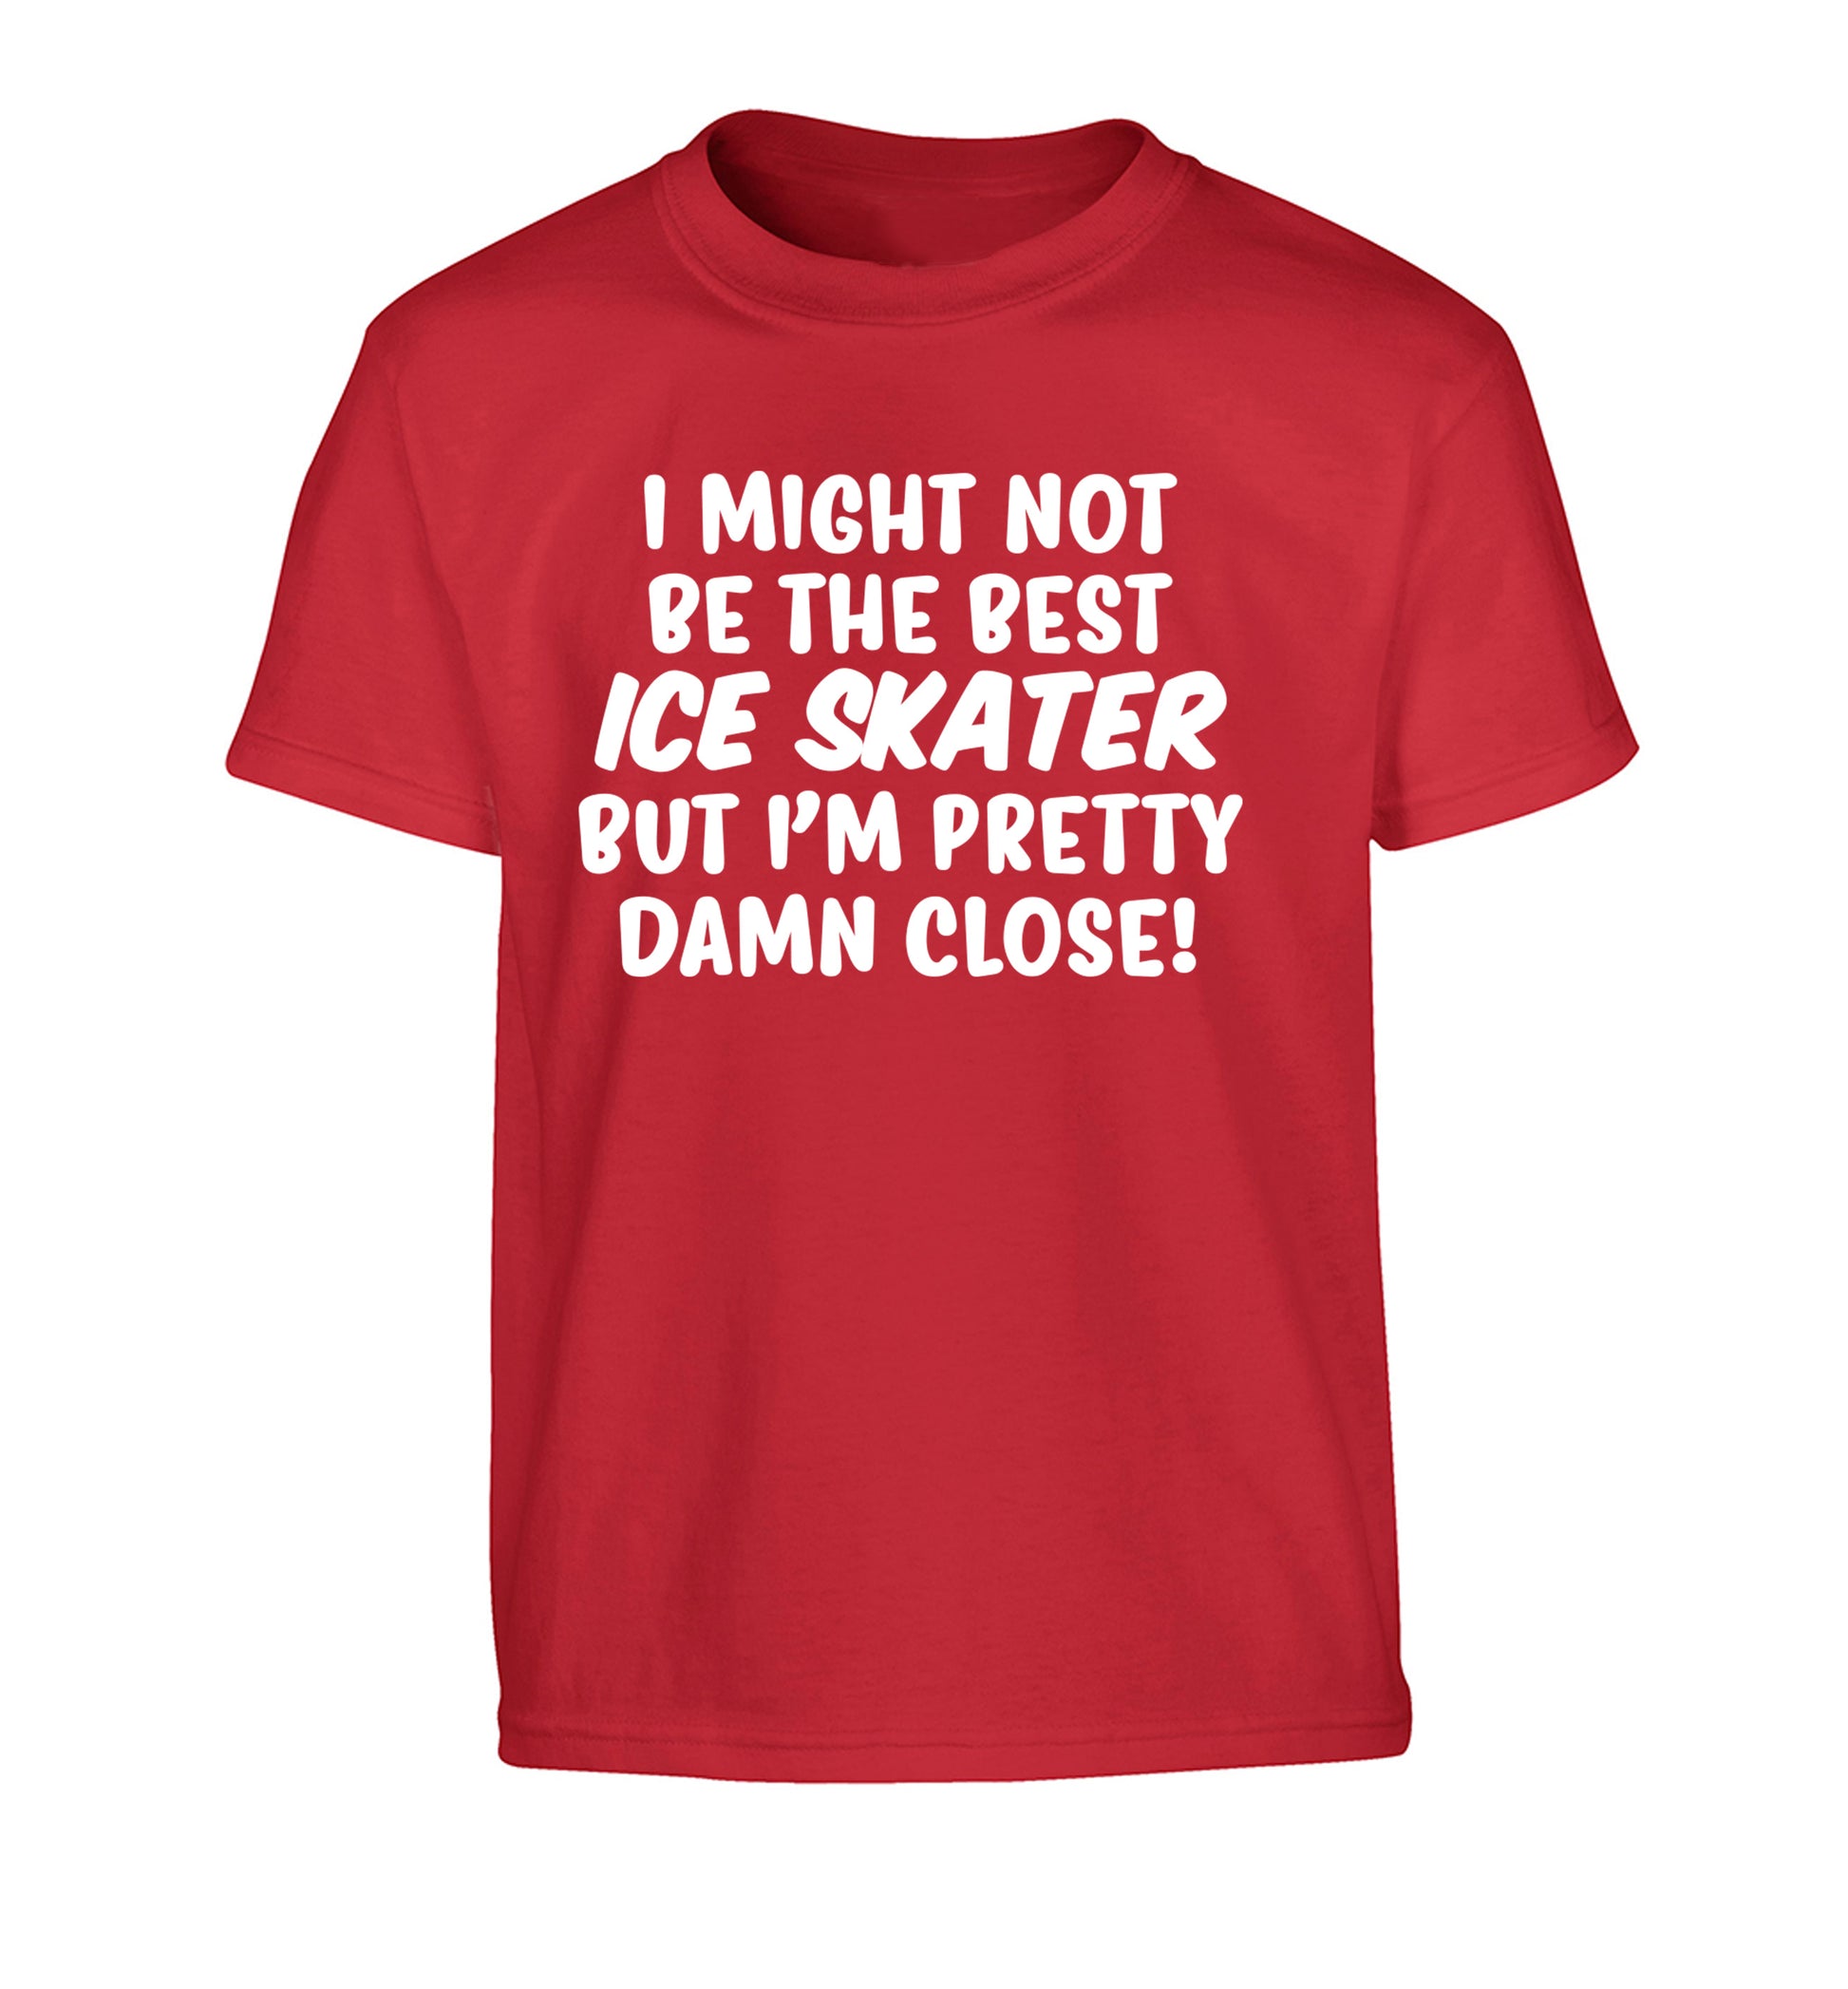 I might not be the best ice skater but I'm pretty damn close! Children's red Tshirt 12-14 Years